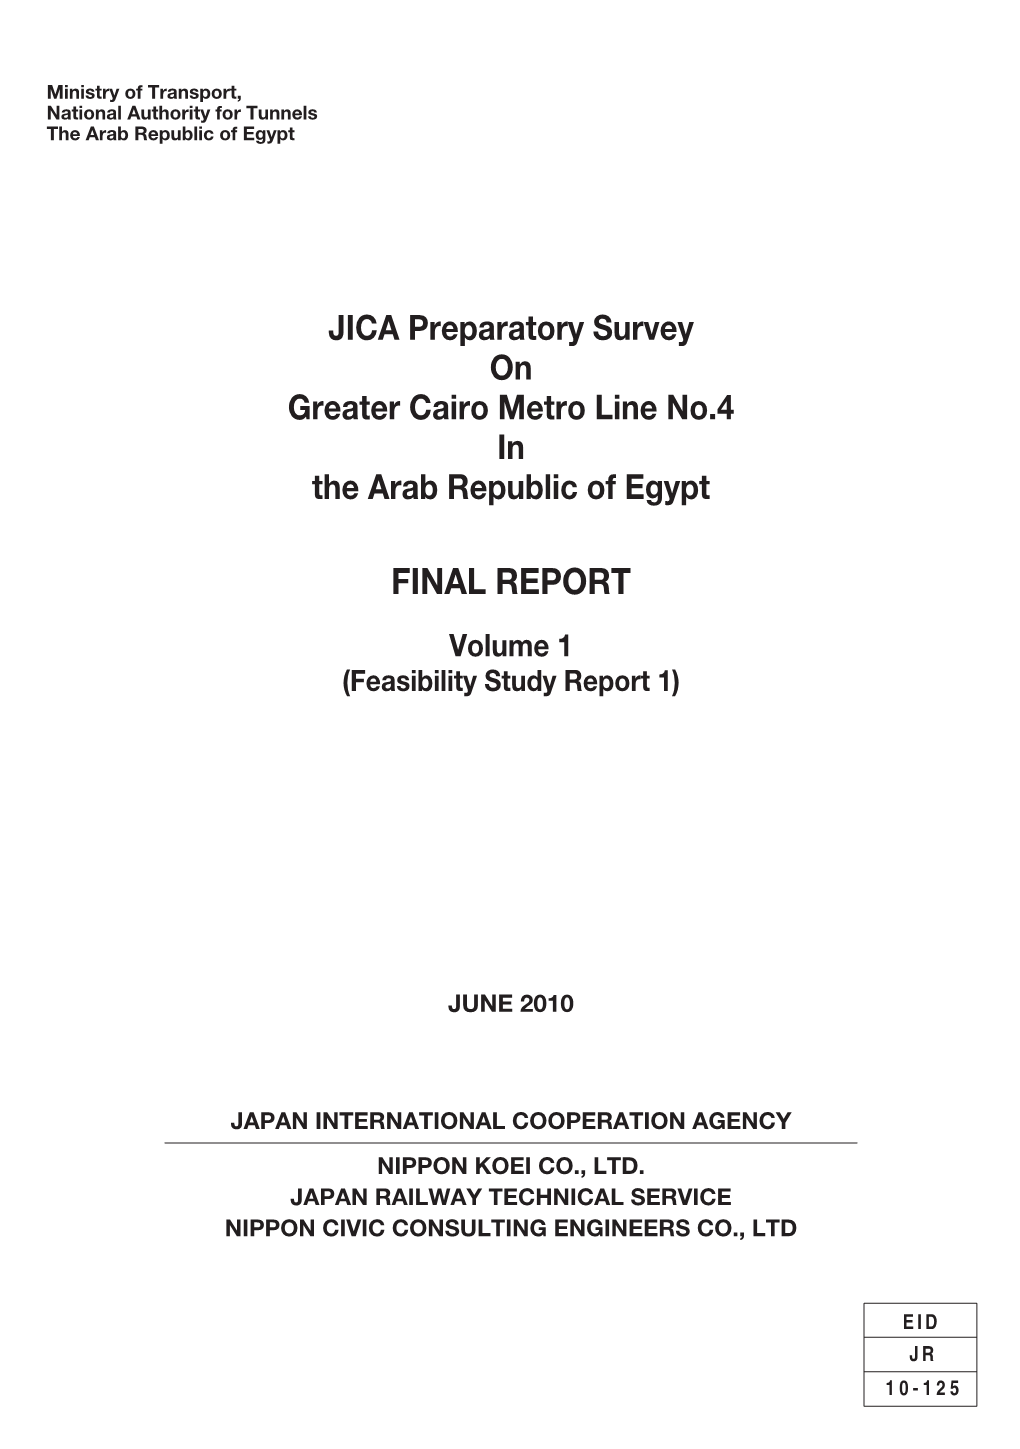 JICA Preparatory Survey on Greater Cairo Metro Line No.4 in the Arab Republic of Egypt FINAL REPORT